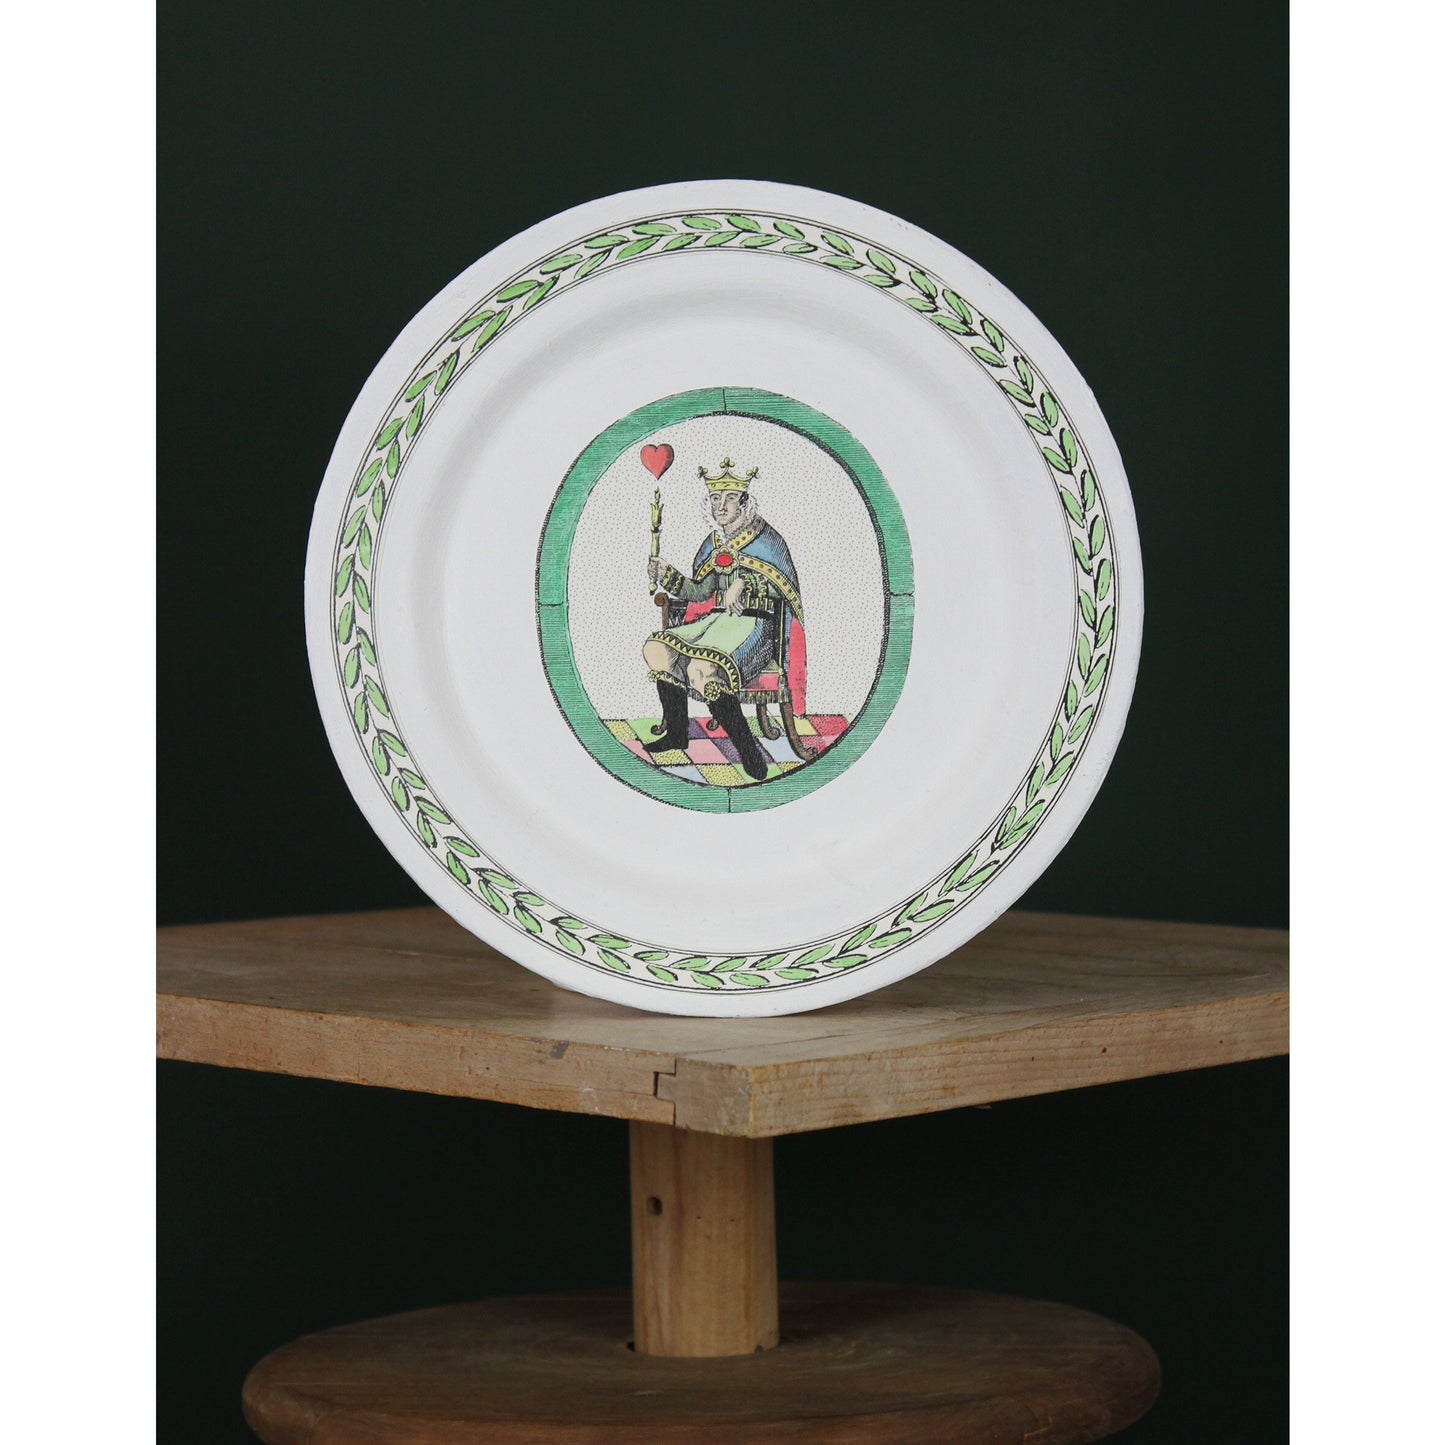 Decorative plate | KING OF HEARTS